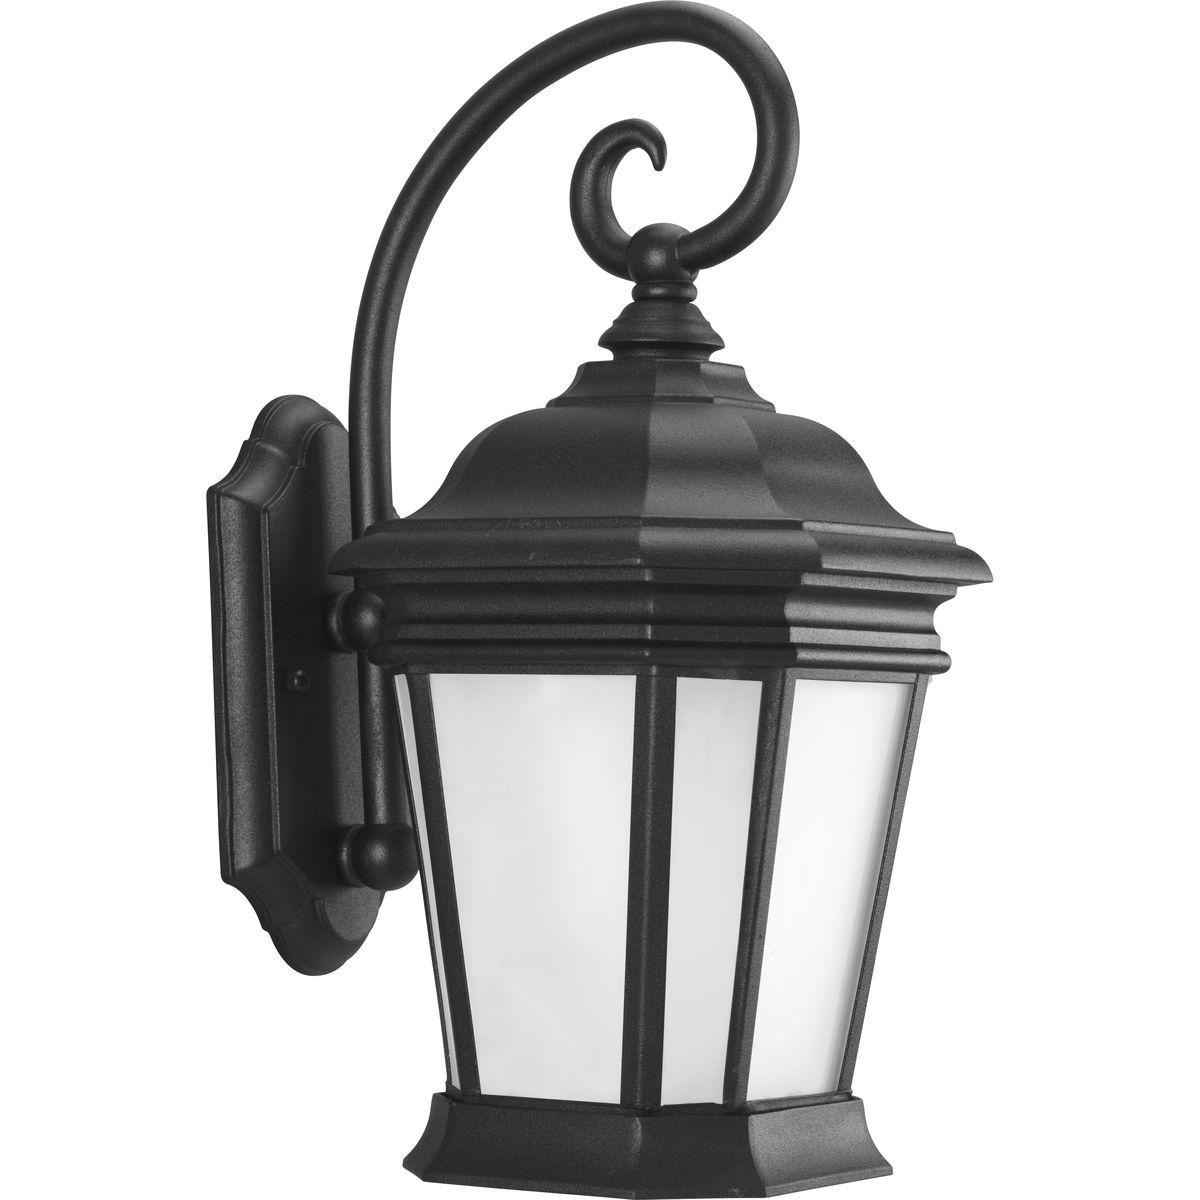 Hubbell P5686-31MD This wall lantern offers updated traditional styling with scroll arm. Etched seeded glass panes give off a soft glow of light. The panes are housed in a handsome black frame.  ; Etched seeded glass panes give off a soft glow of light. ; The panes are hous